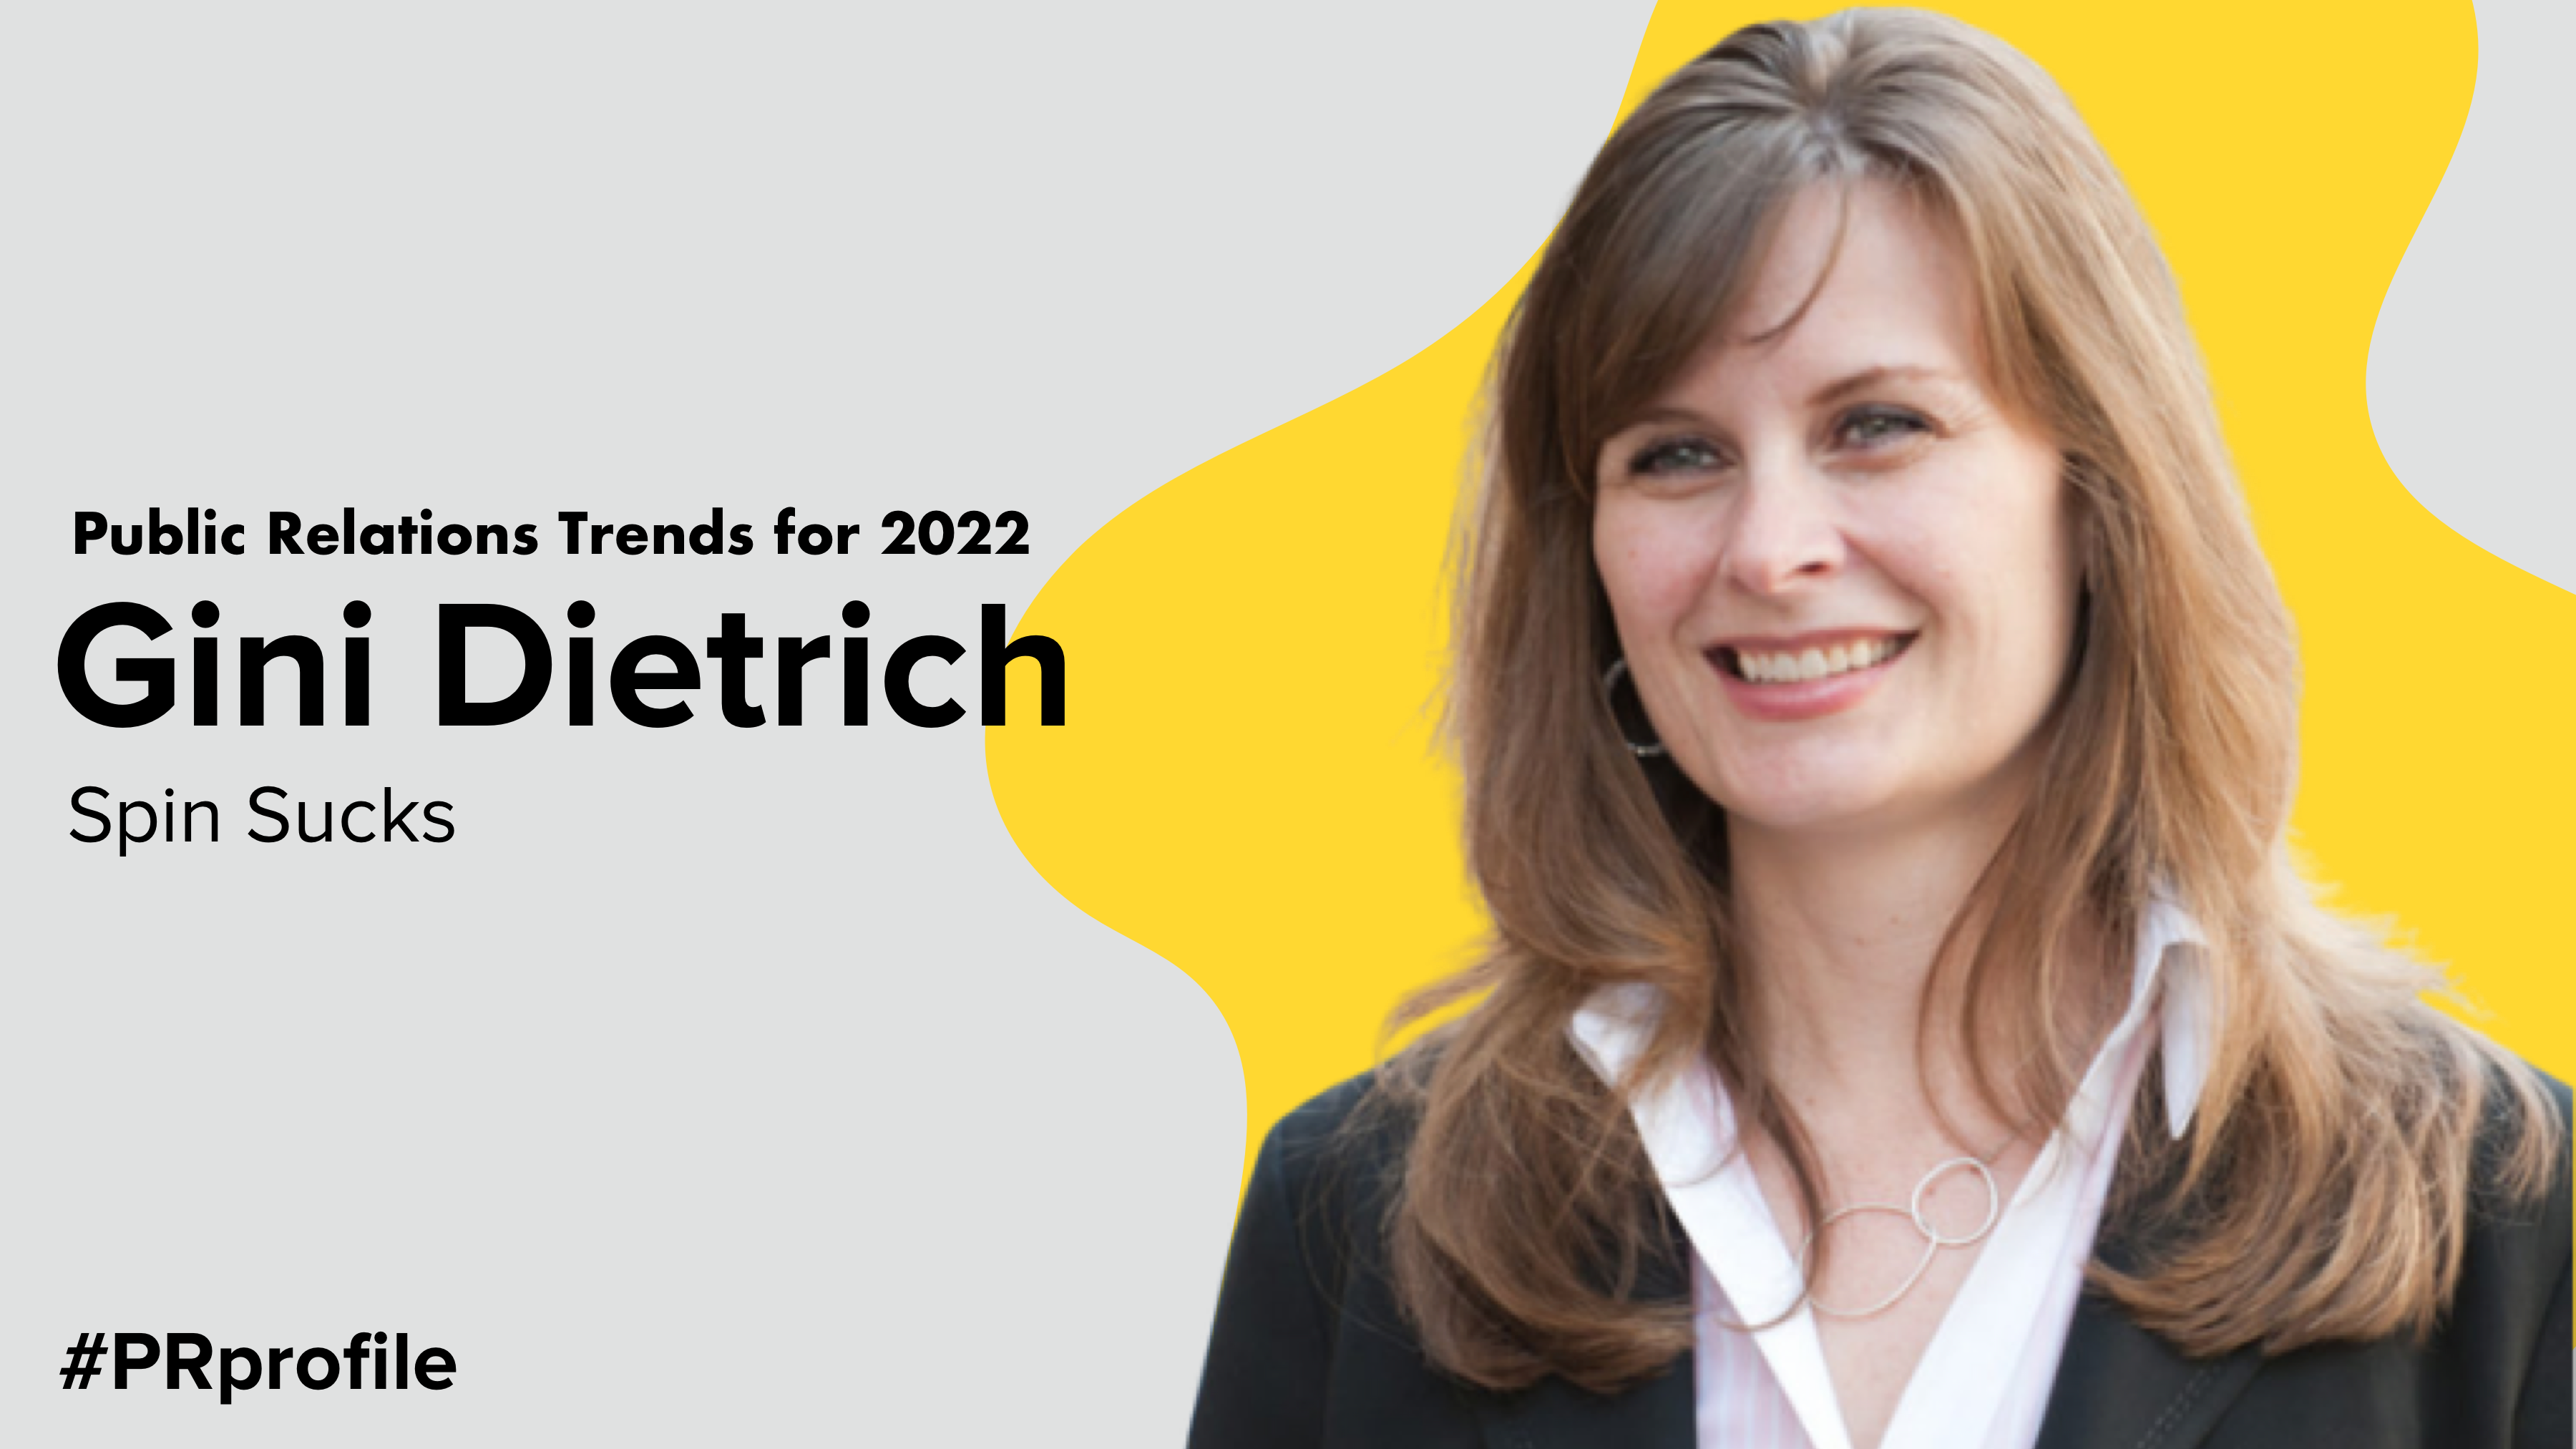 Public Relations Trends for 2022 with Gini Dietrich